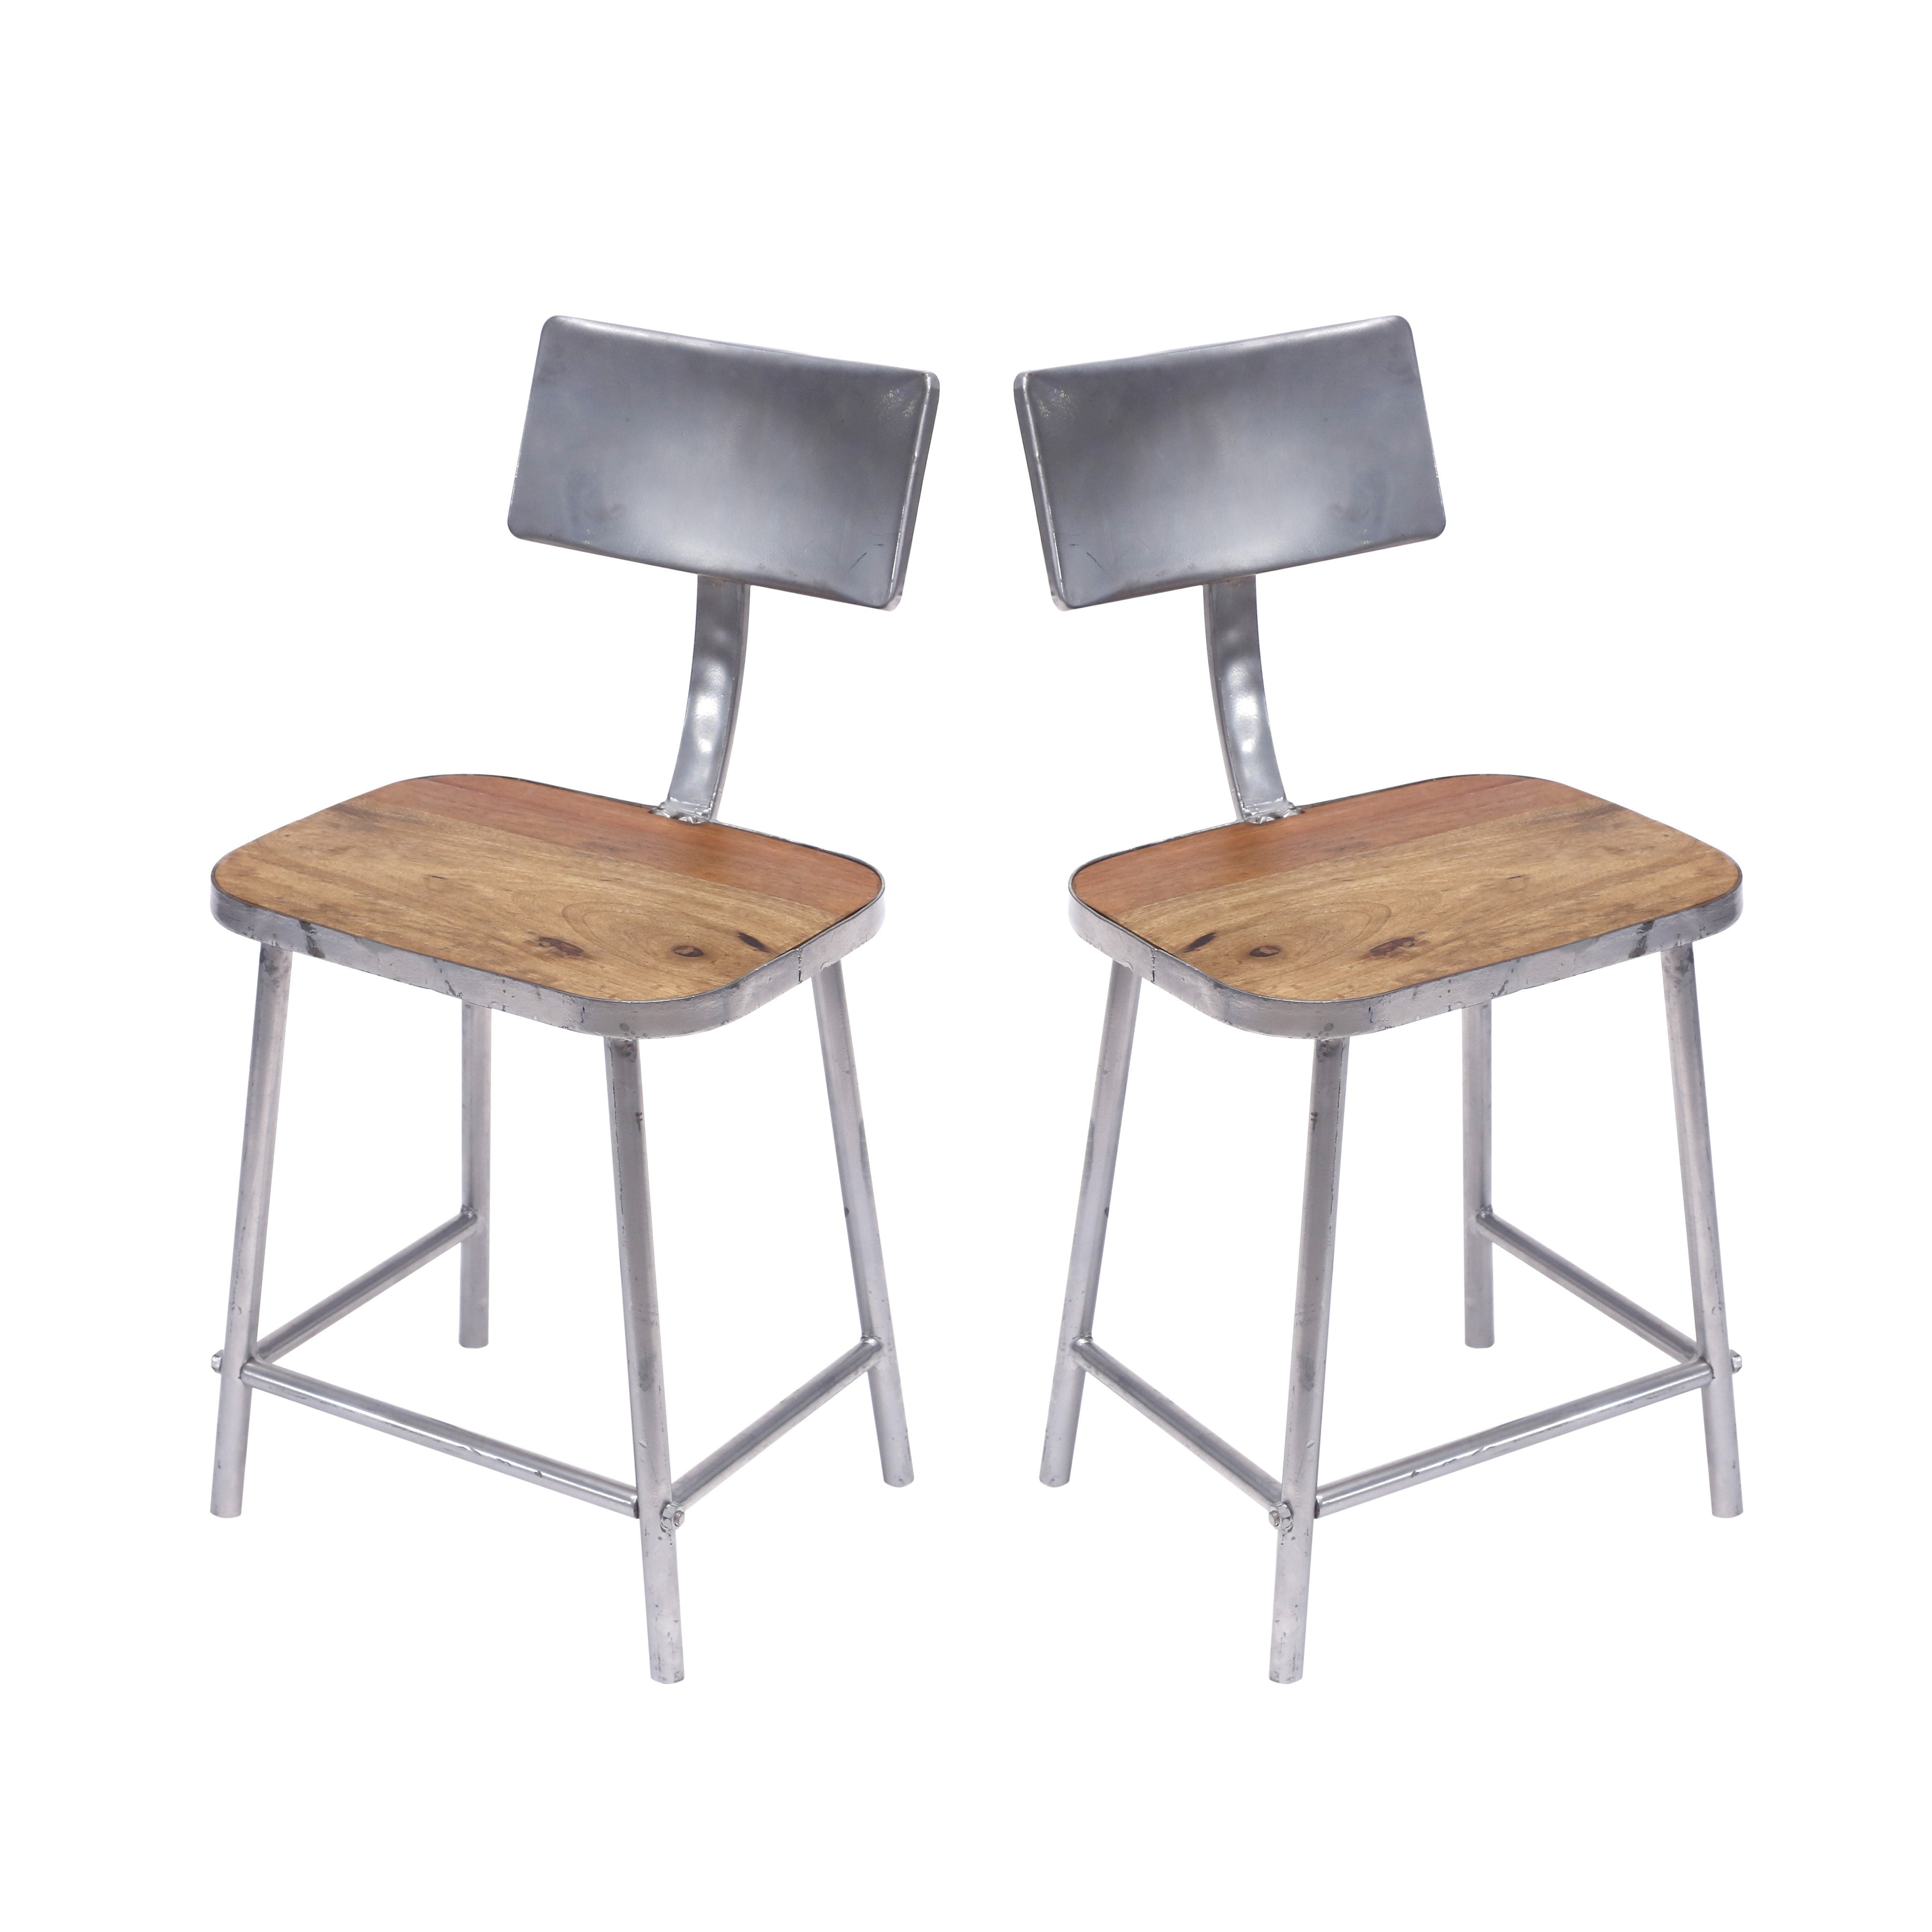 (Set of 2) Metal + Wooden Chair Dining Chair